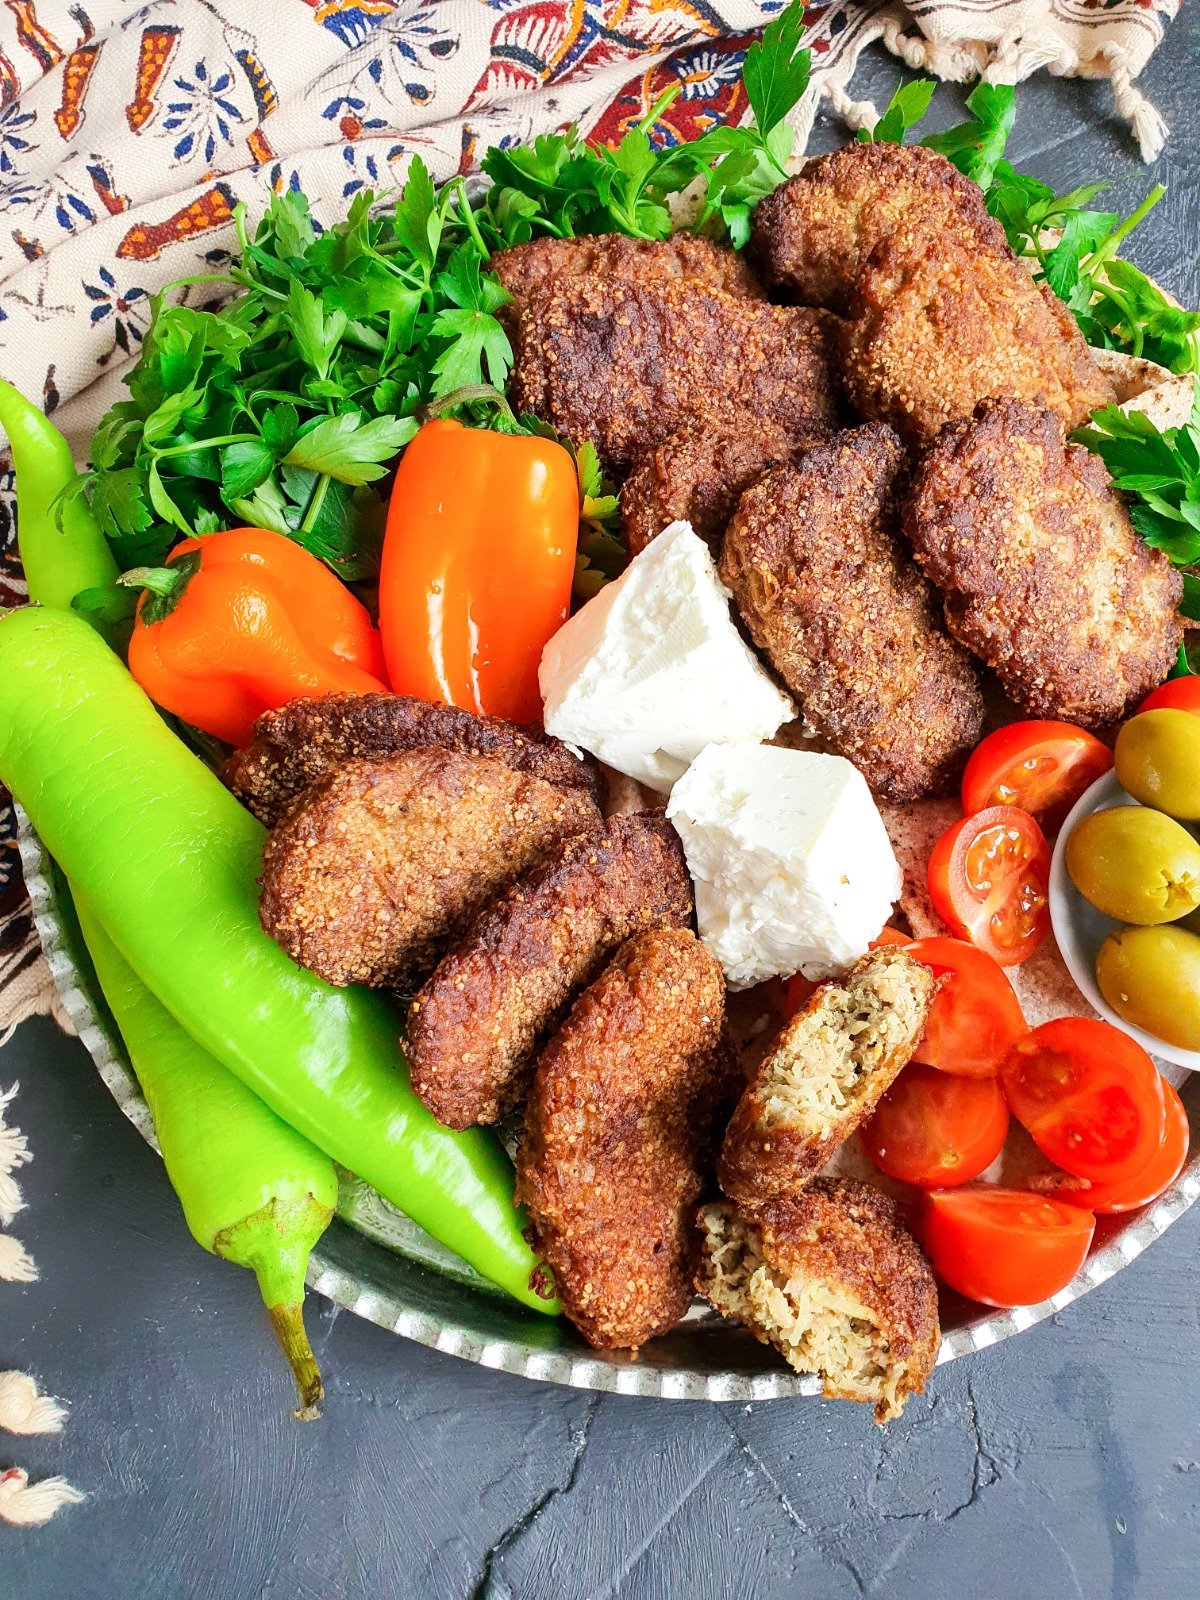 Enjoy your Persian meat kotlets with chunks of white cheese along with home made chips, bread, and lots of salads.